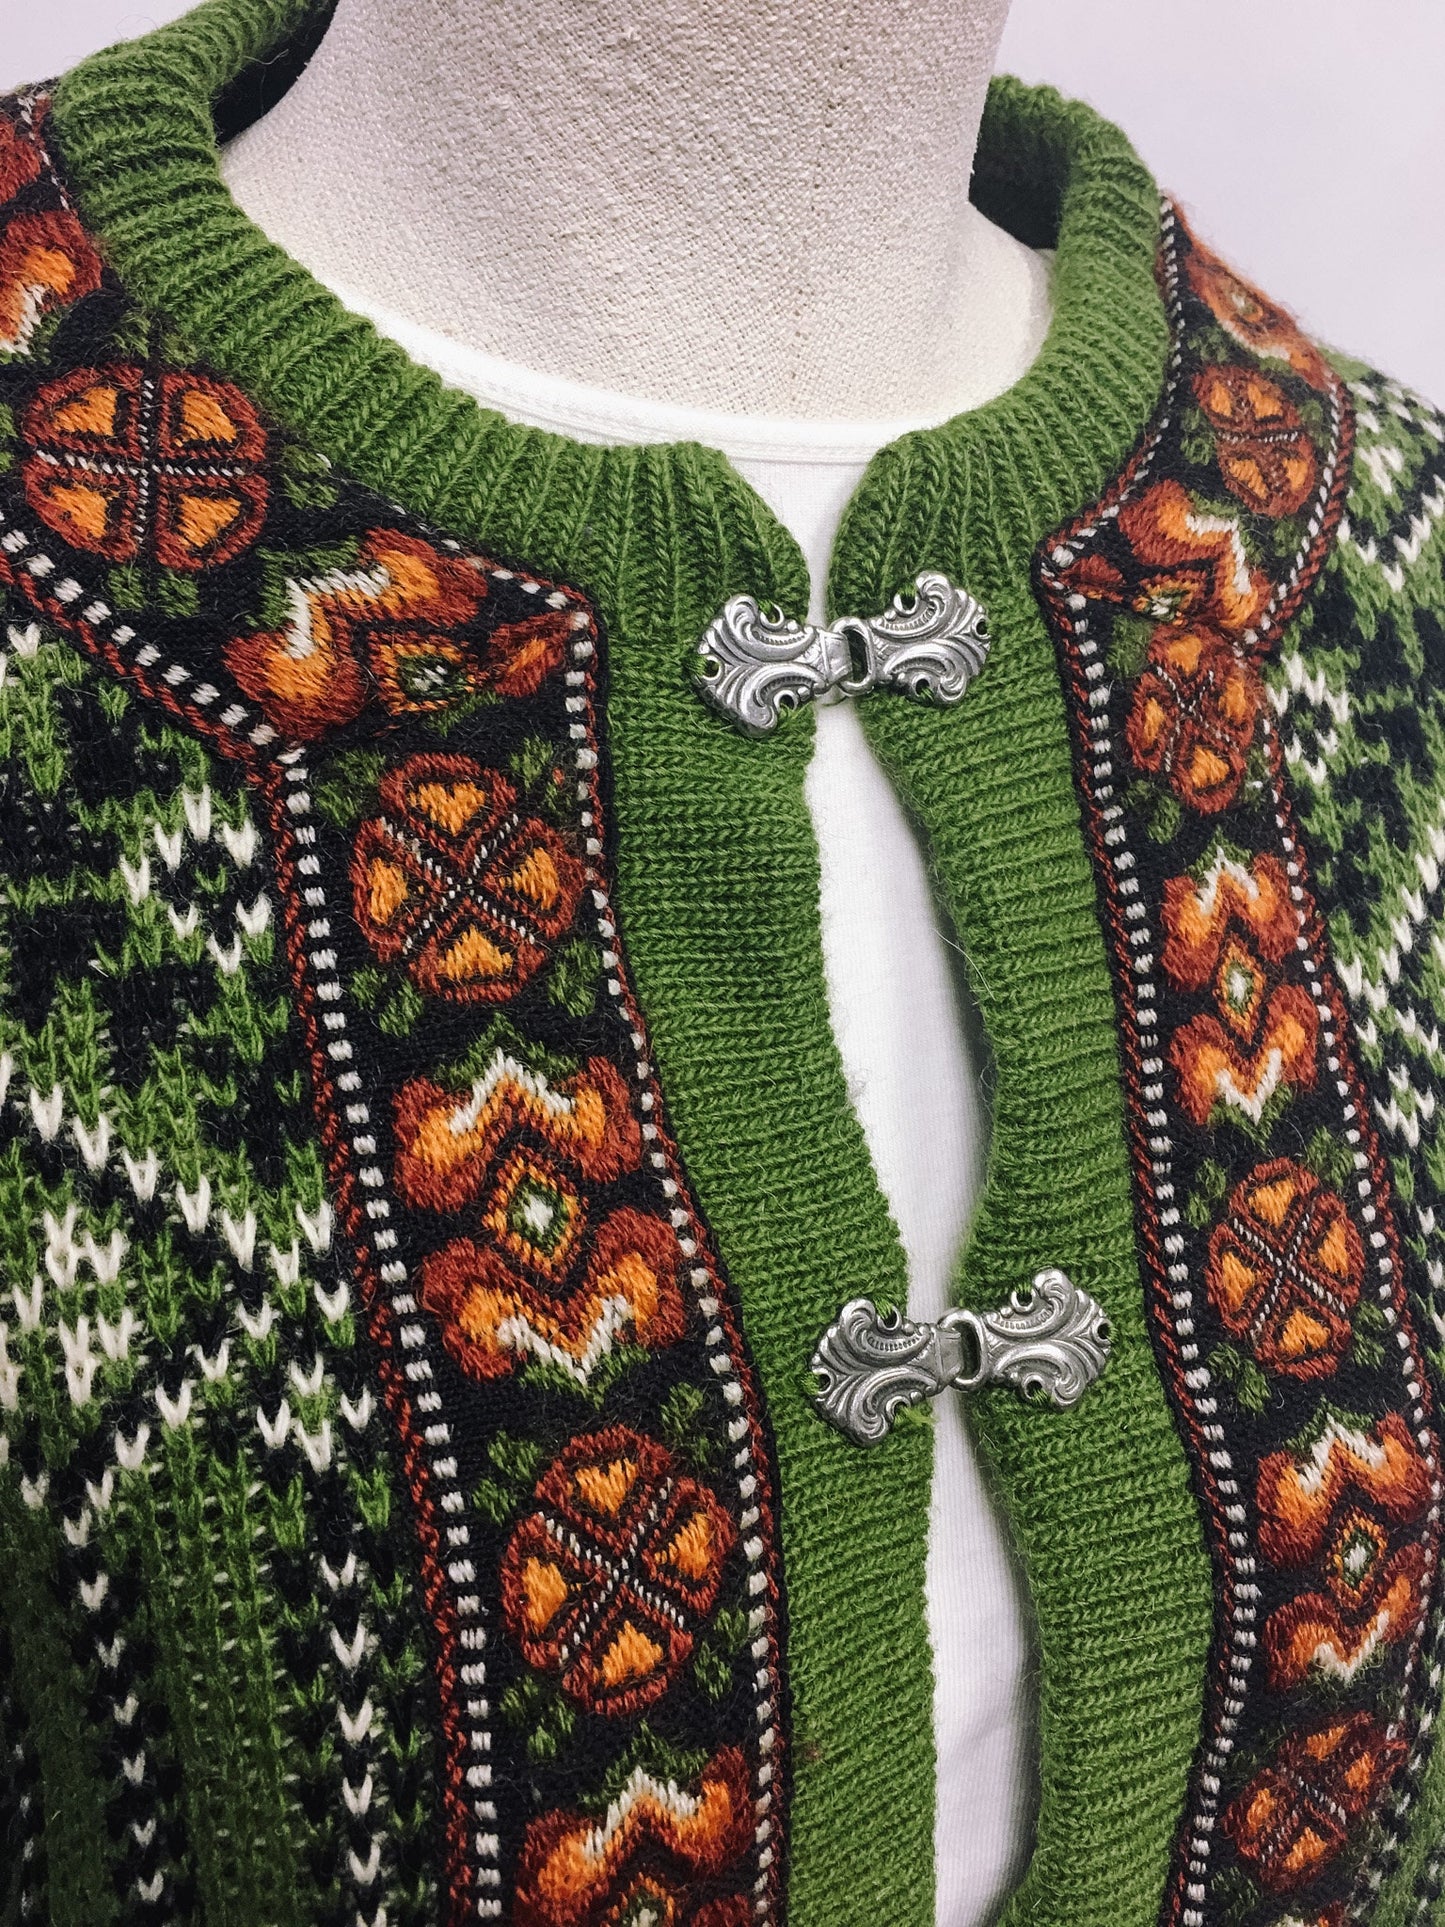 90s Nordstrikk Nordic Green Embroidered Wool Cardigan With Metal Clasp Enclosure, Vintage Wool Nordic Sweater, Made in Norway